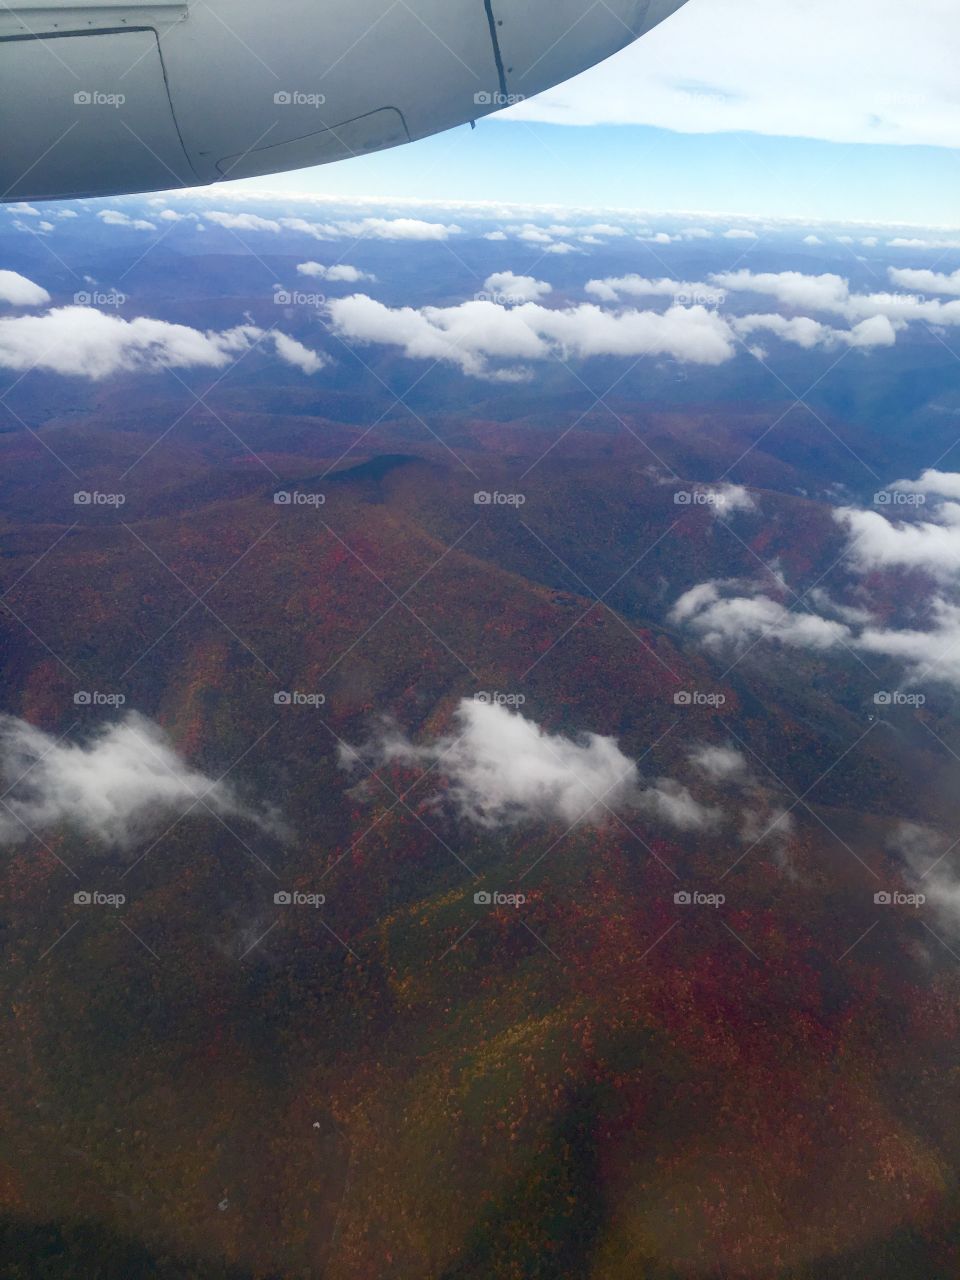 A final shot of the wonderful view of the foliage in Upstate NY from above.